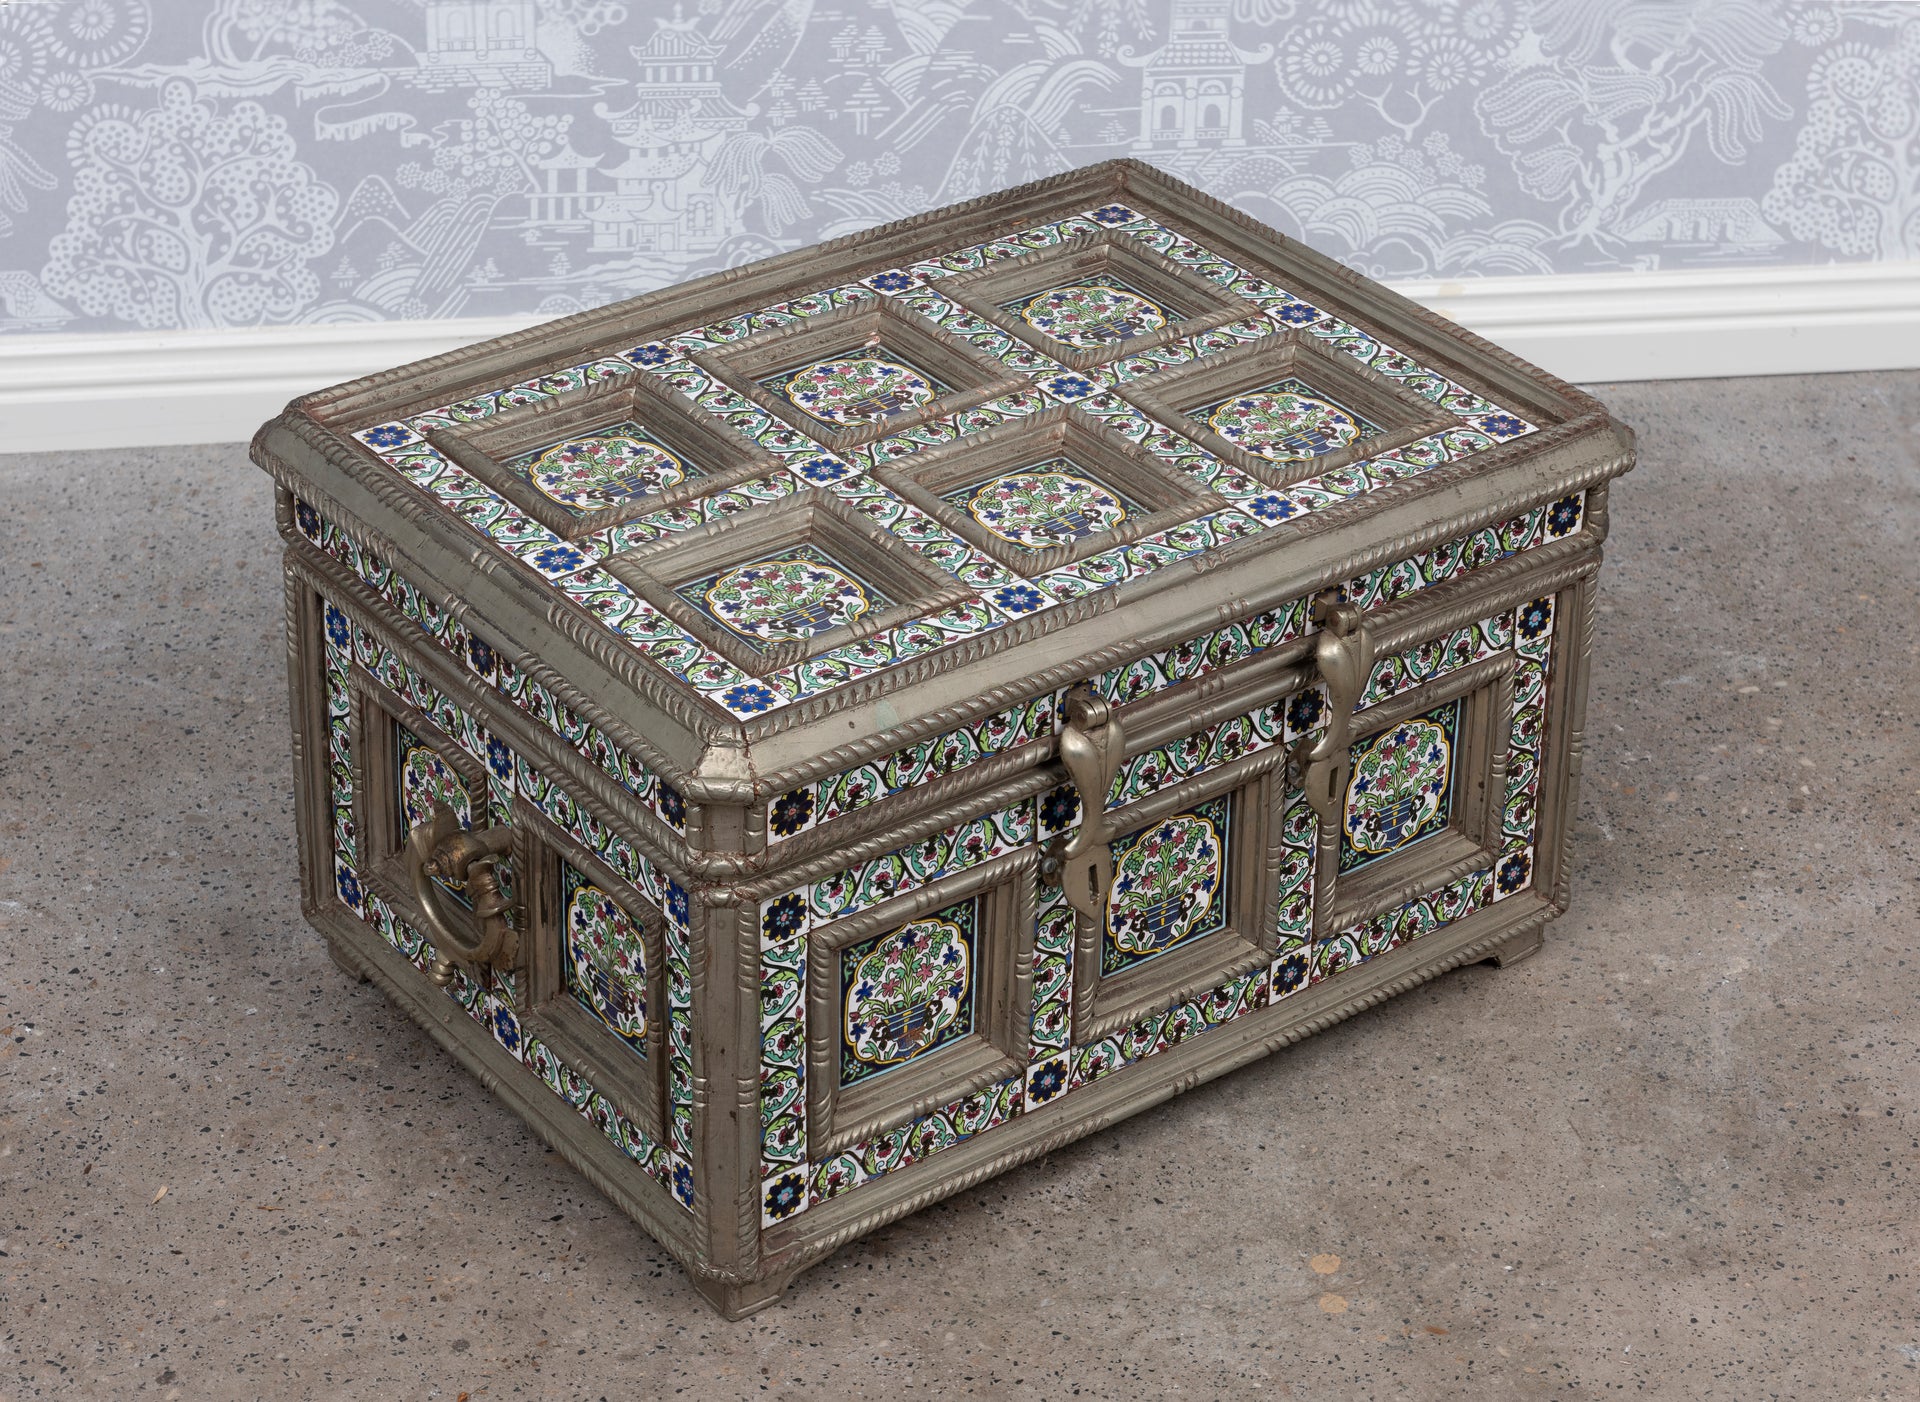 SOLD An exotic timber, ceramic tile and silvered metal box, Indian 20th Century